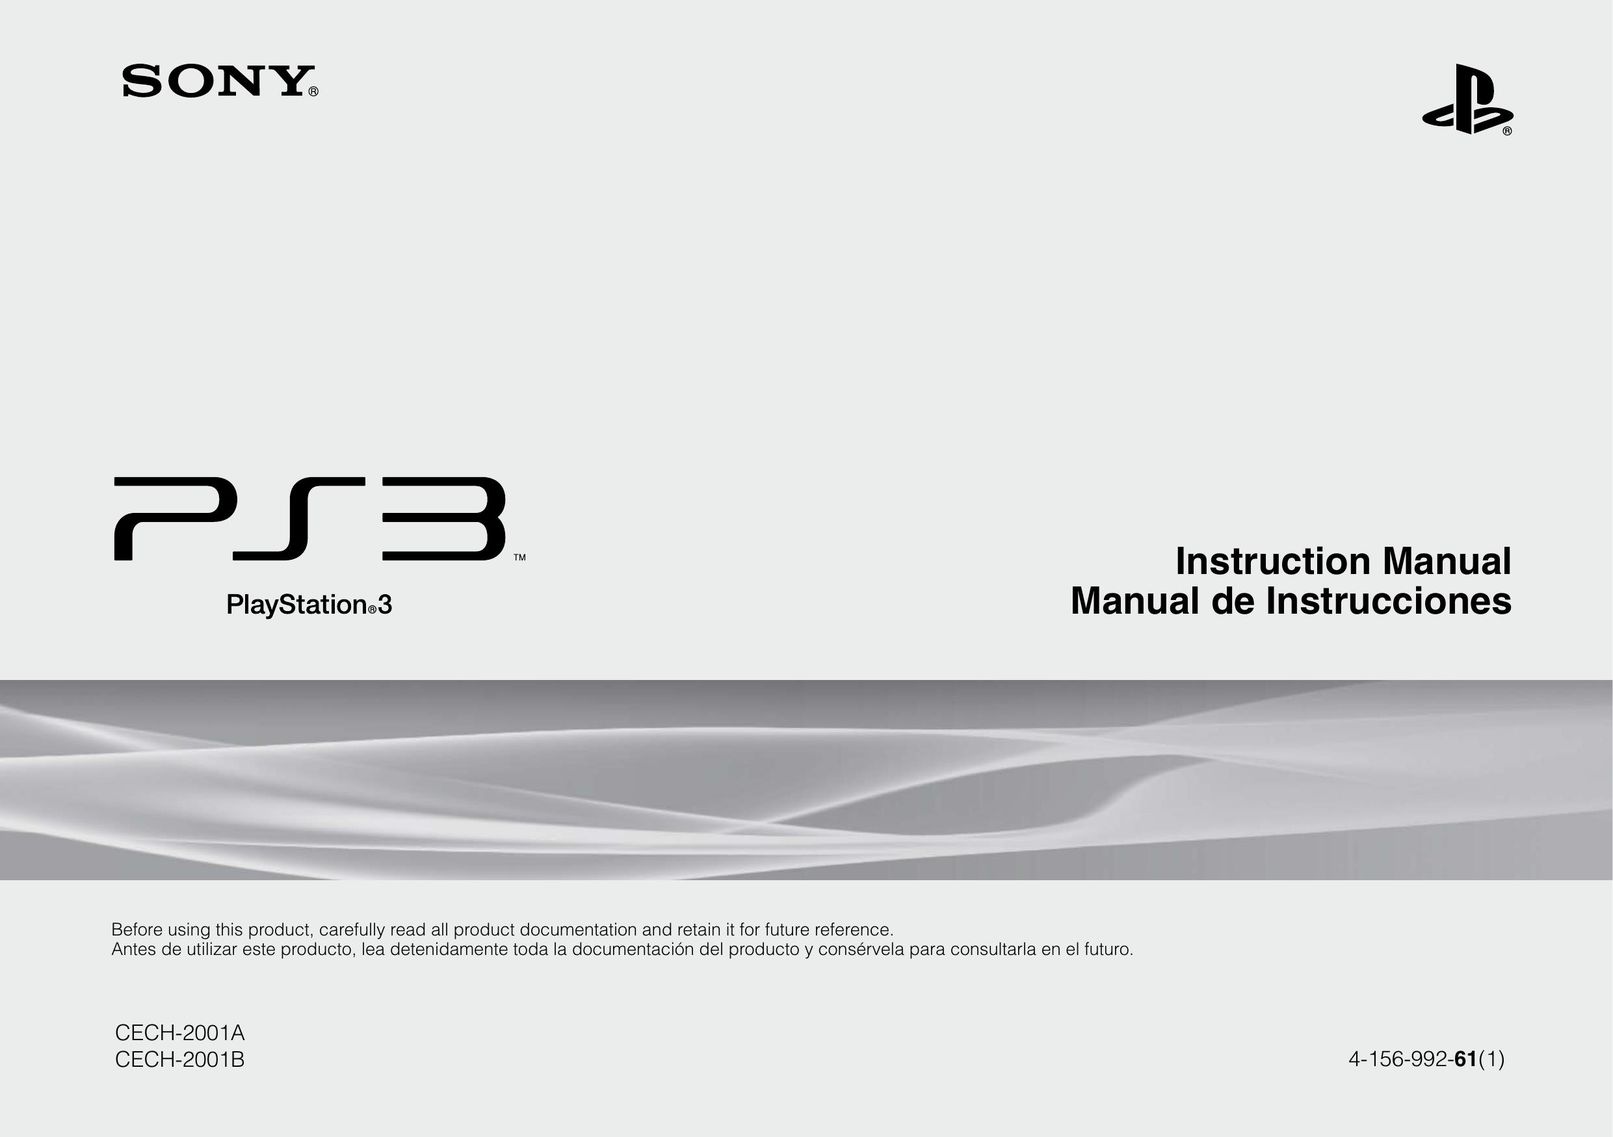 Sony 4-156-992-61(1) Video Game Console User Manual